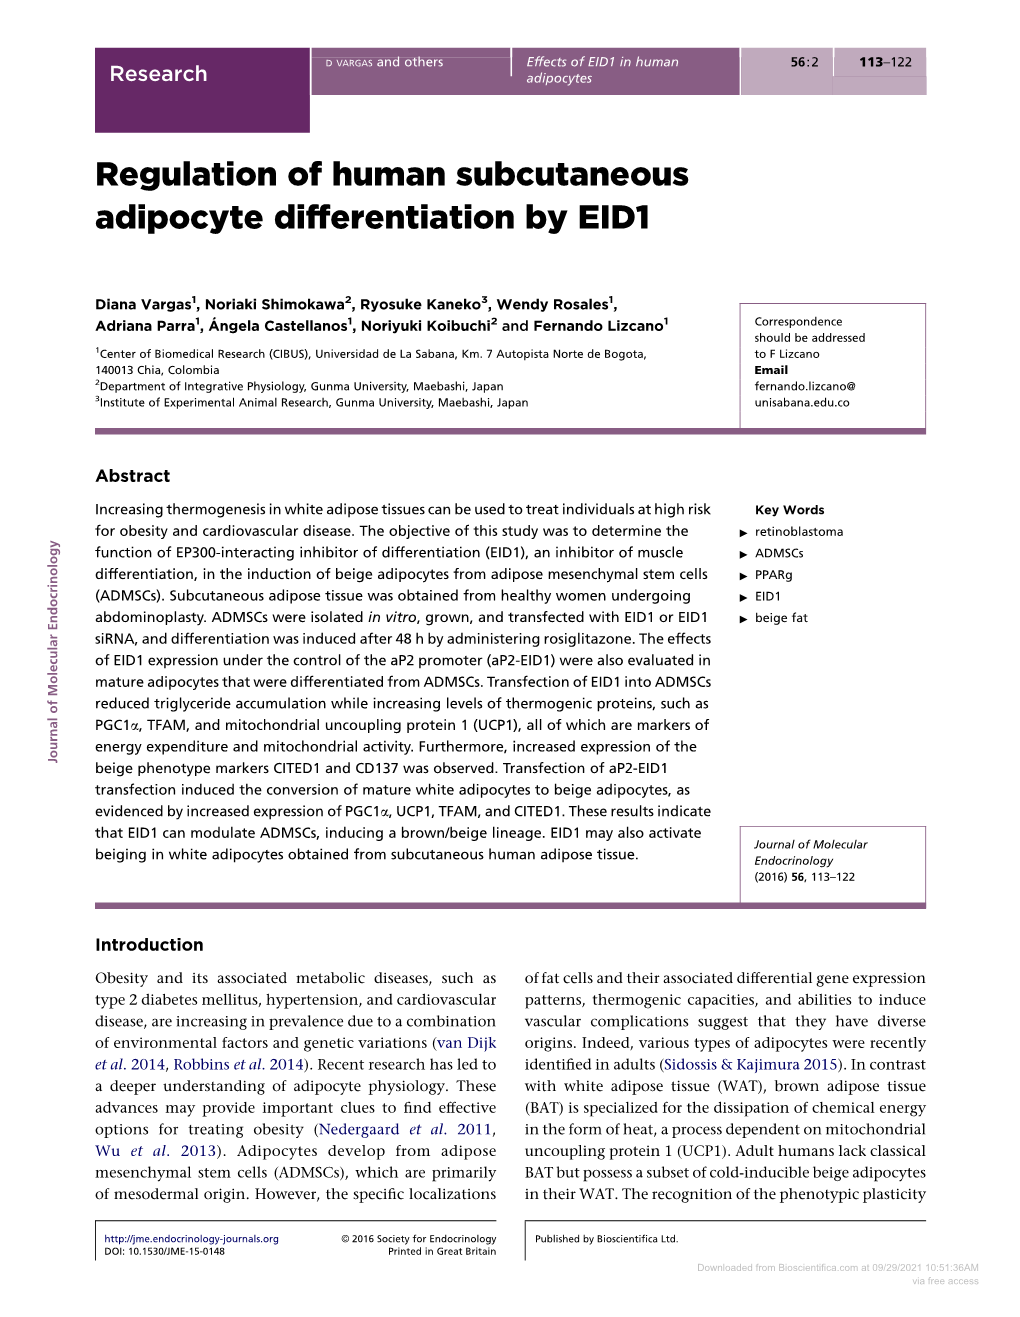 Regulation of Human Subcutaneous Adipocyte Differentiation by EID1